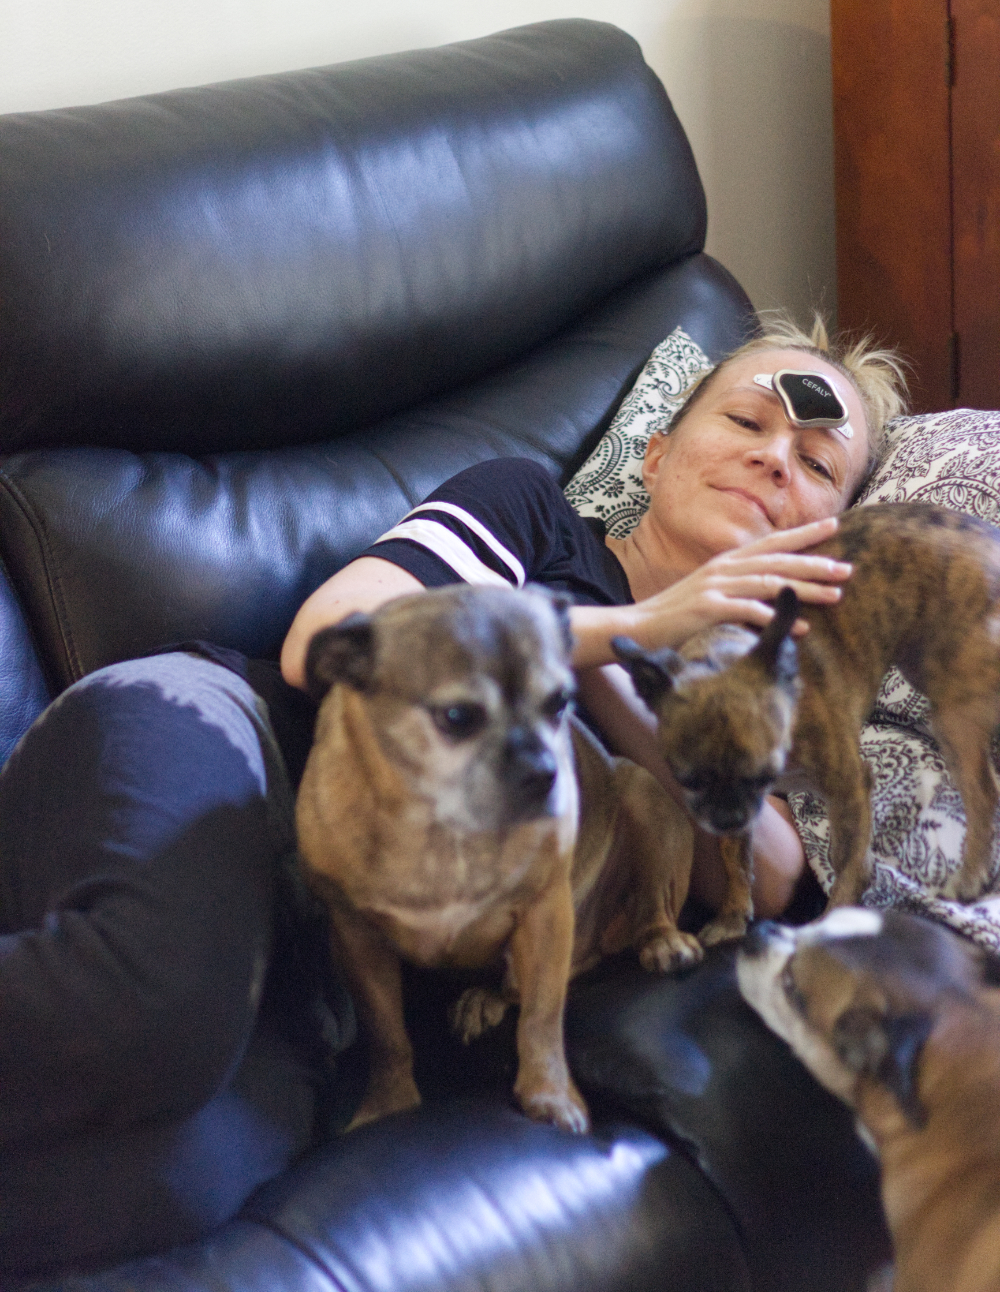 Woman wearing a cefaly device surrounded by dogs on a couch.